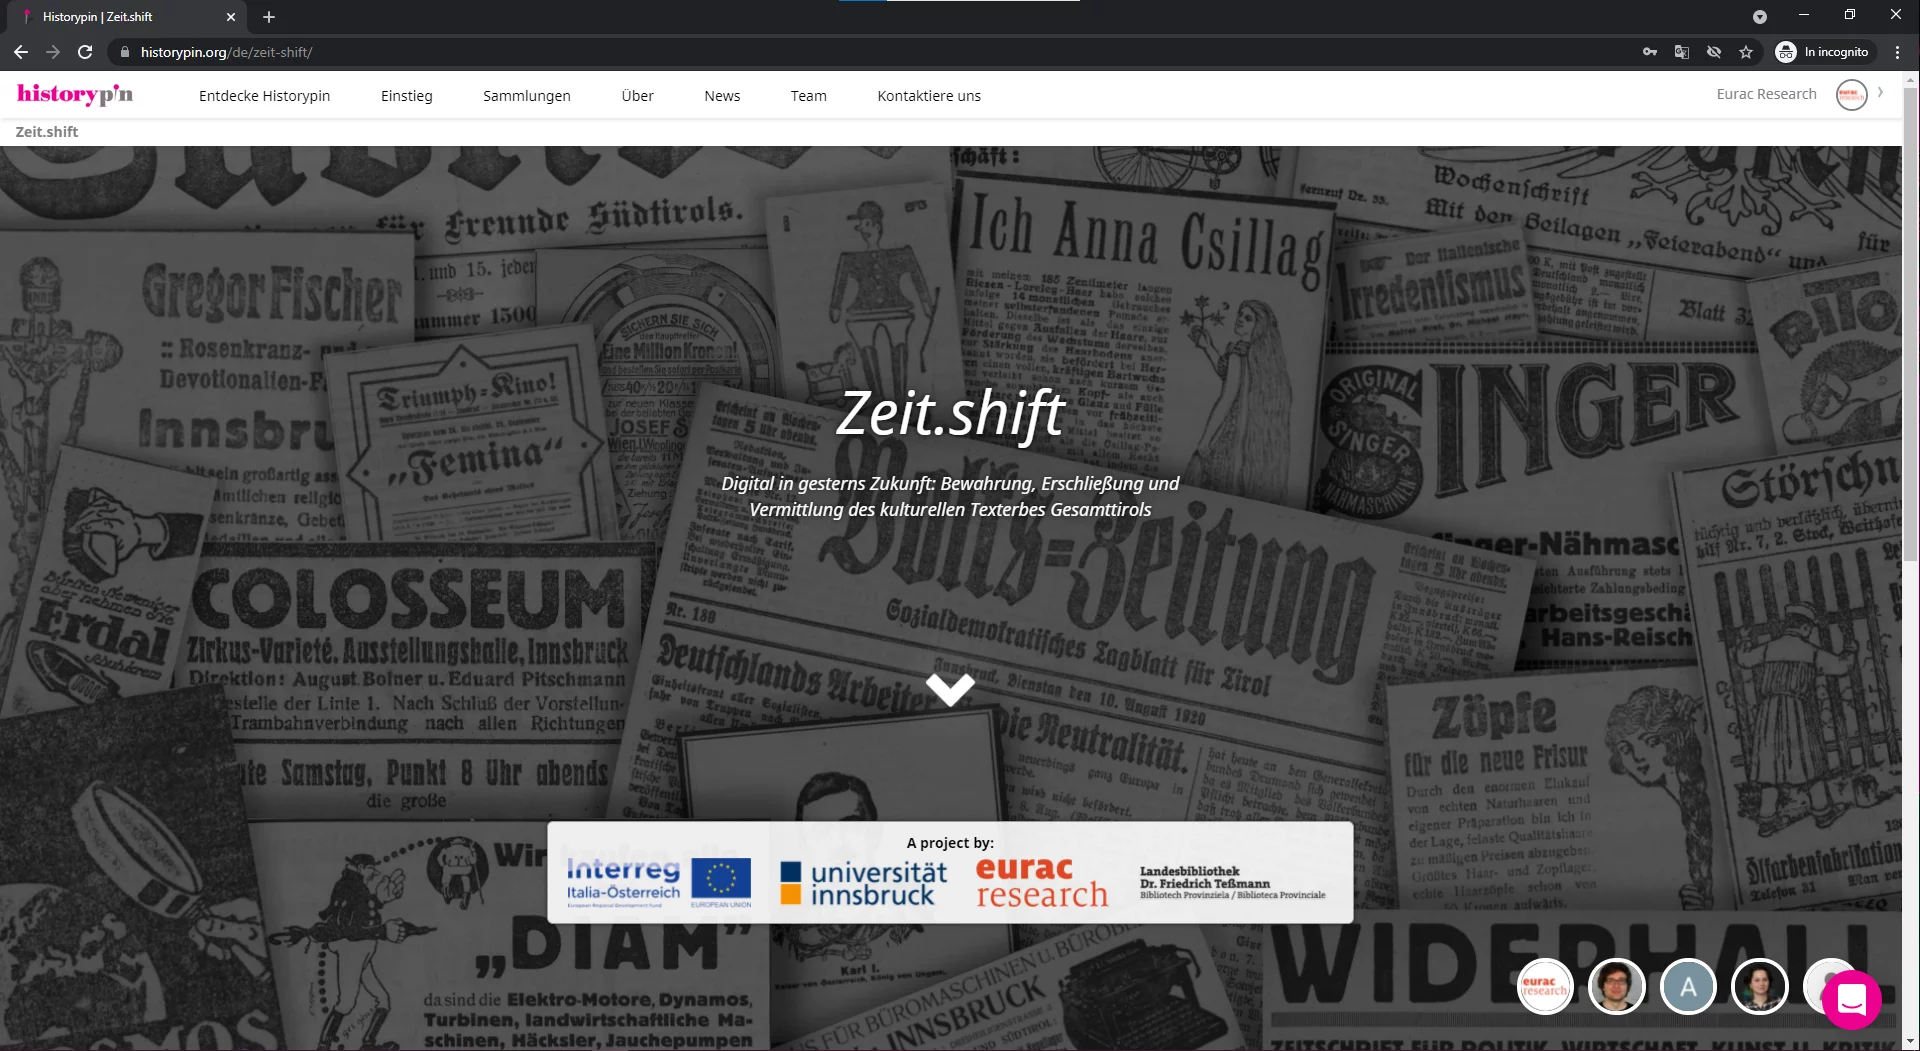 Landing page of the Zeit.shift collection in Historypin.